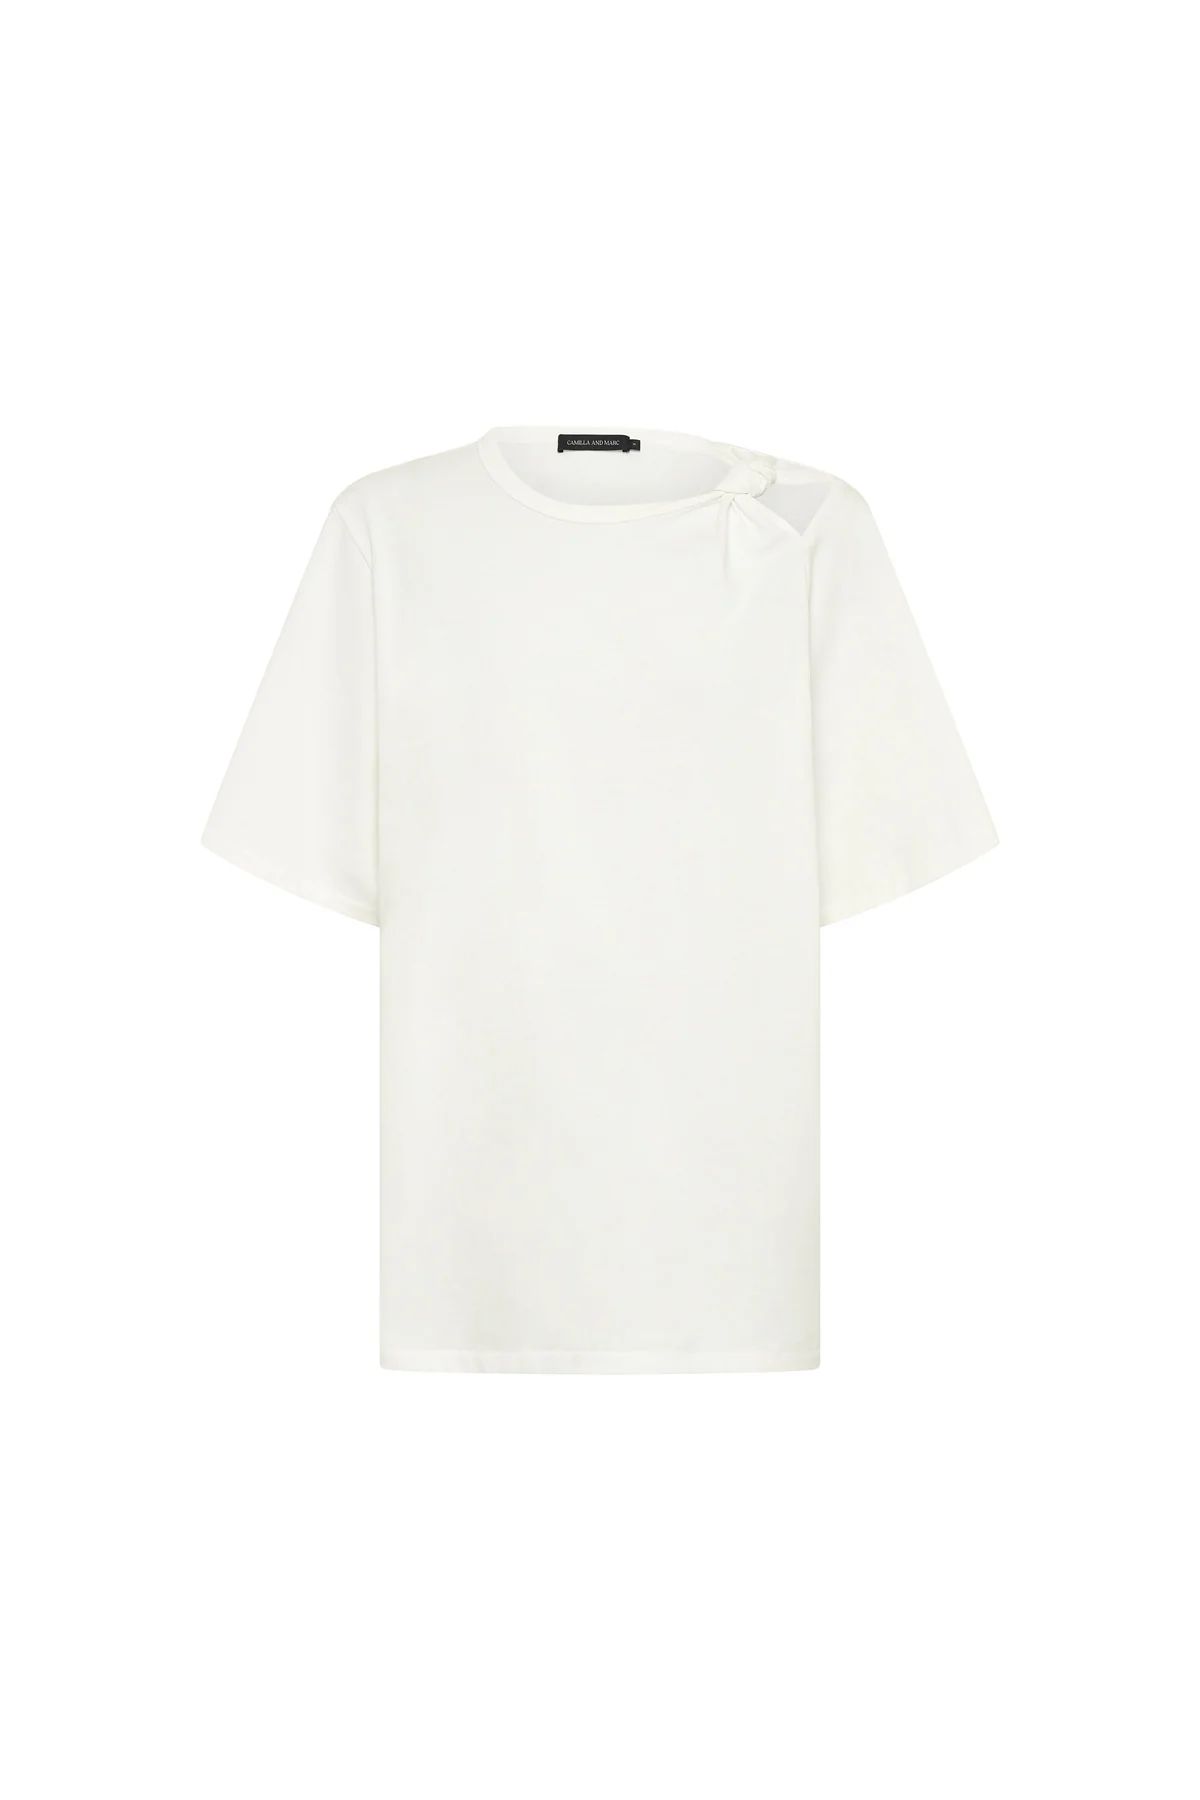 Juno Knot Tee | Camilla and Marc